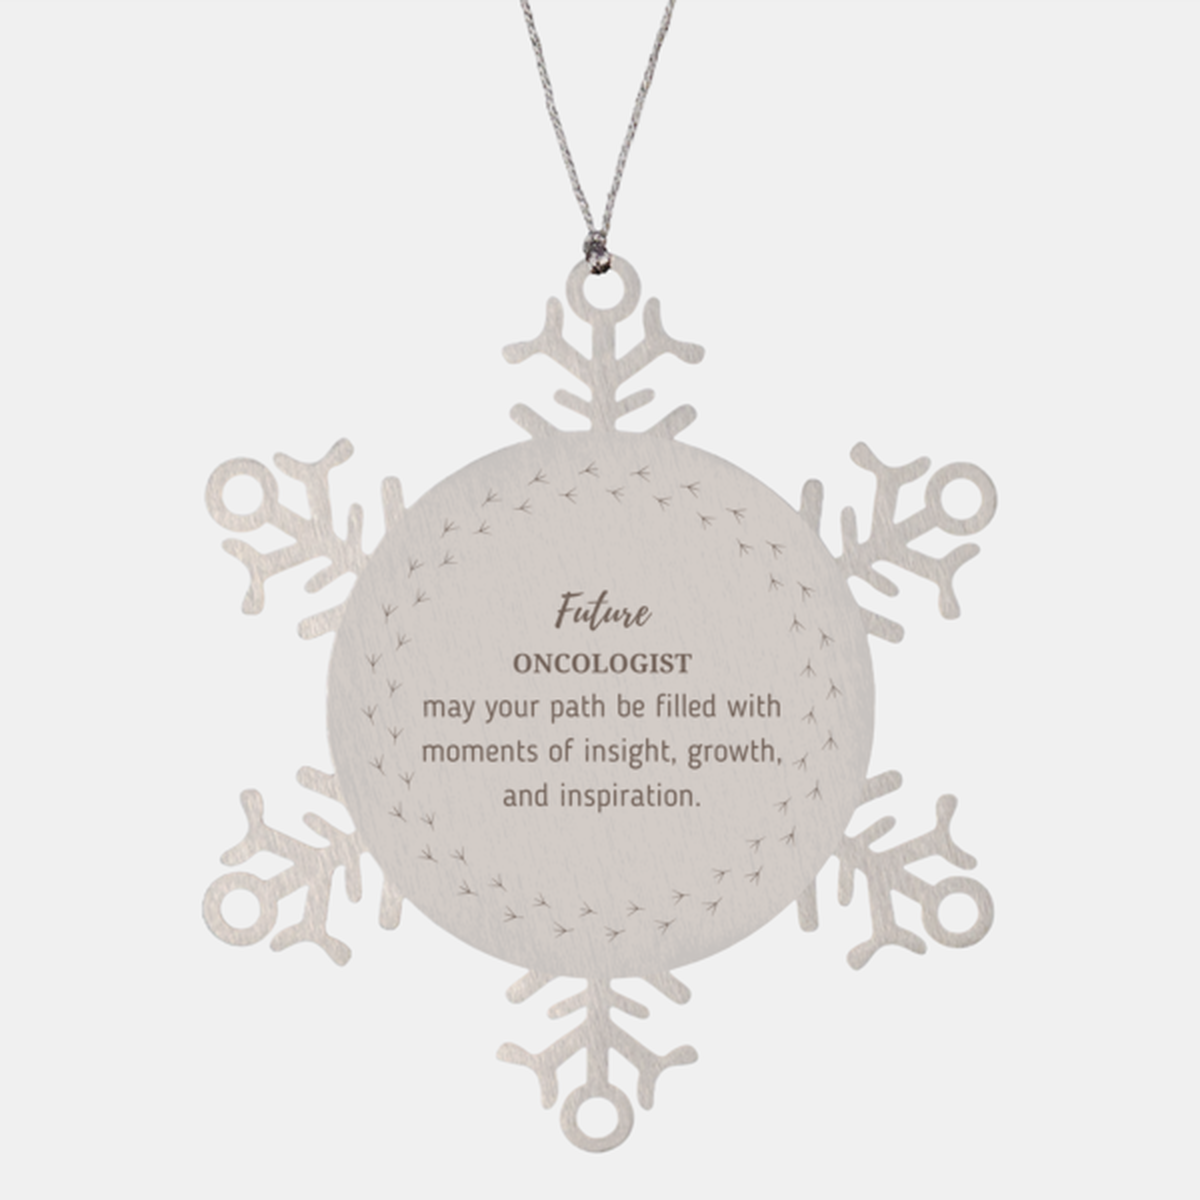 Future Oncologist Gifts, May your path be filled with moments of insight, Graduation Gifts for New Oncologist, Christmas Unique Snowflake Ornament For Men, Women, Friends